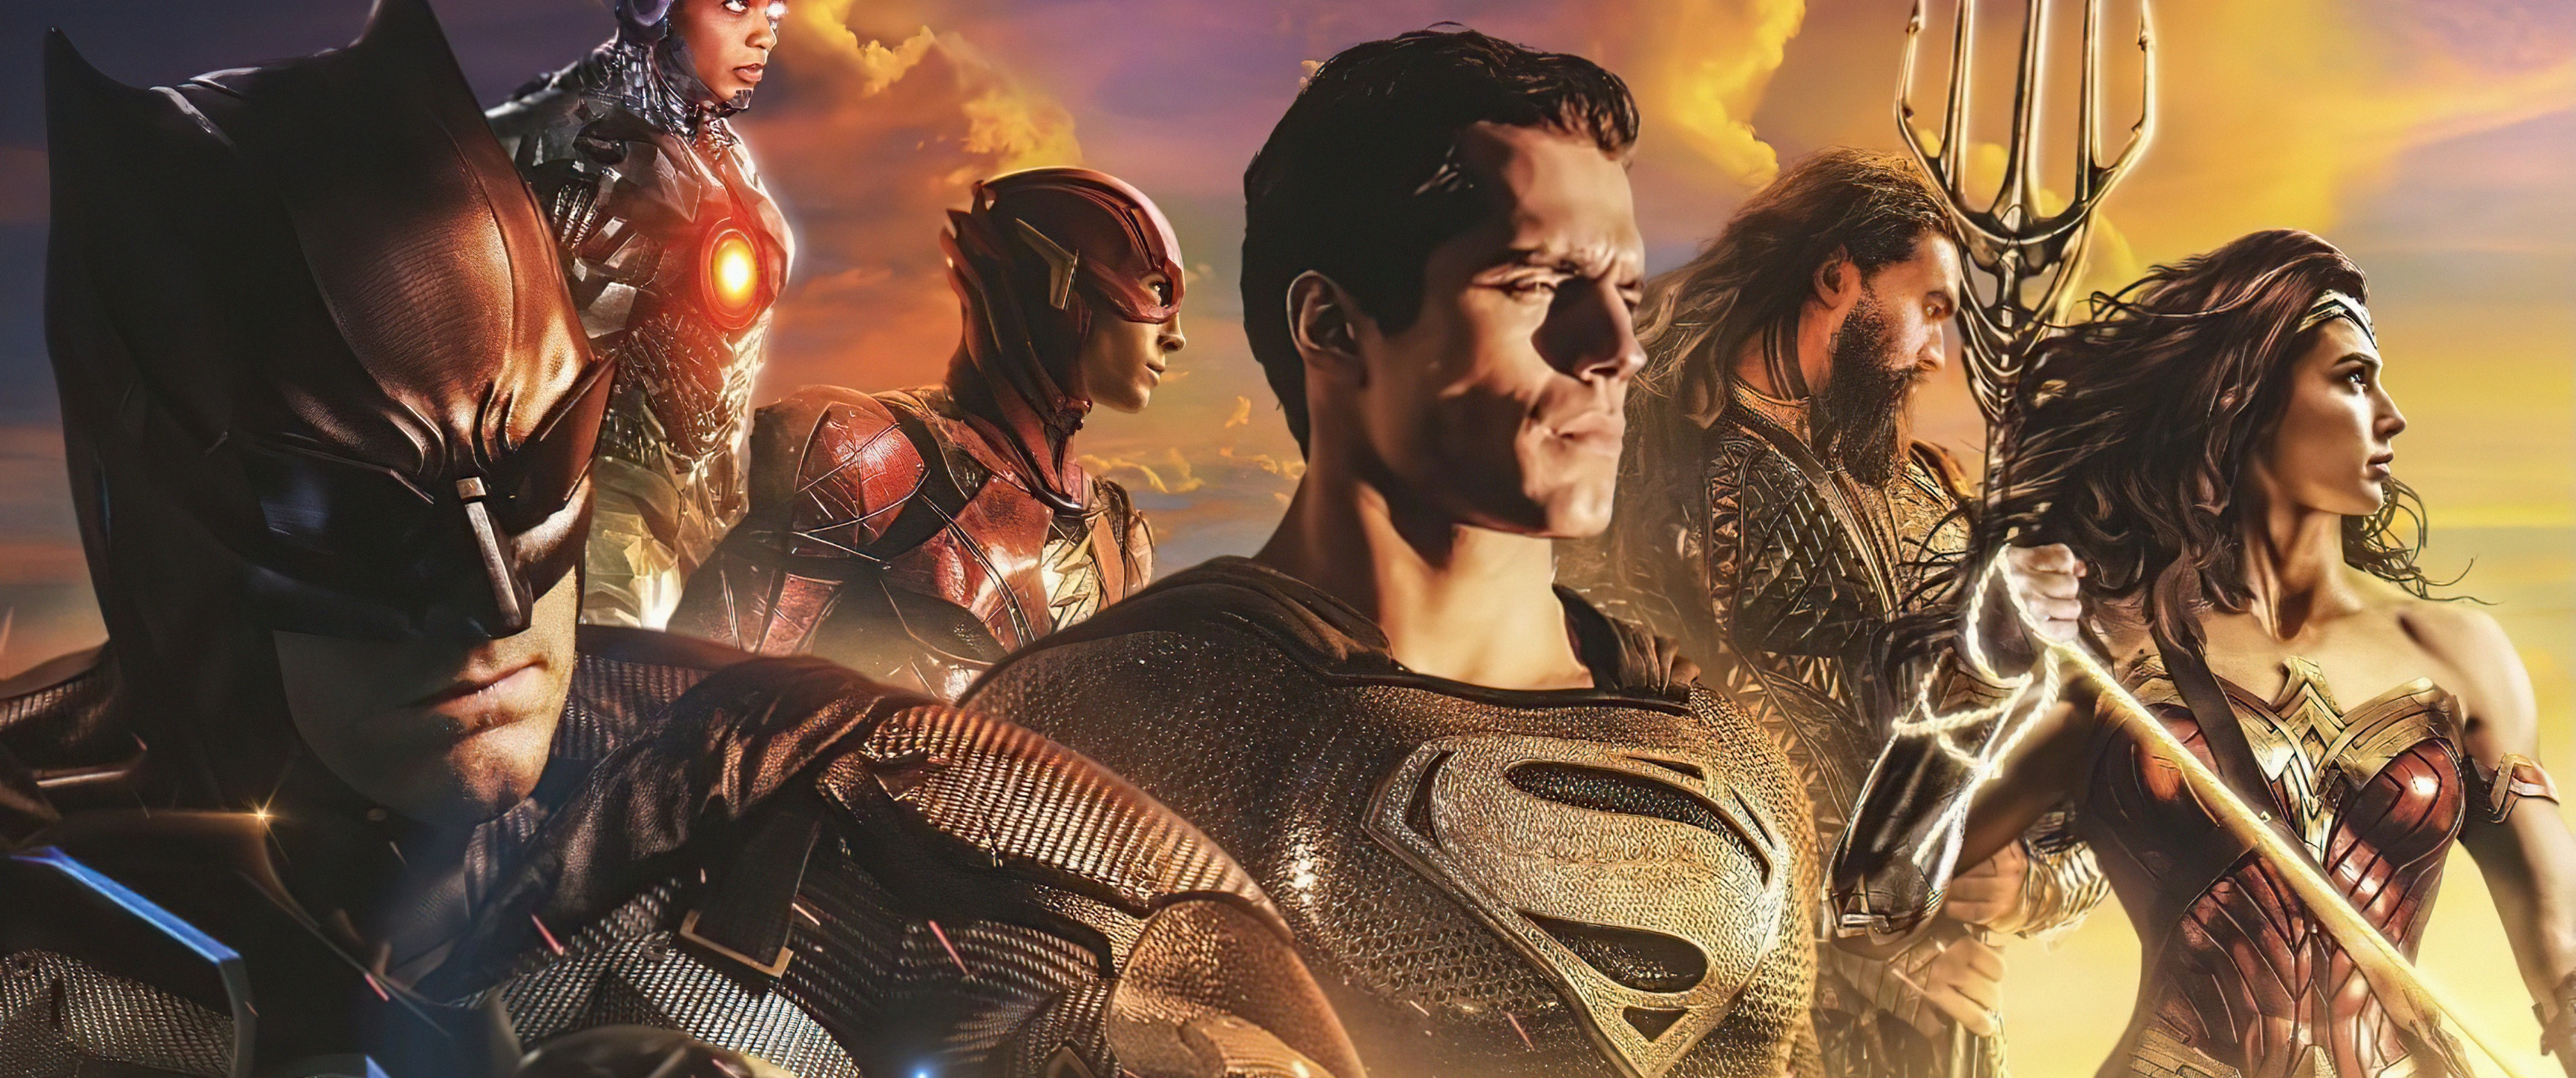 Zack Snyder's Justice League Wallpaper 4K, DC Superheroes, Movies